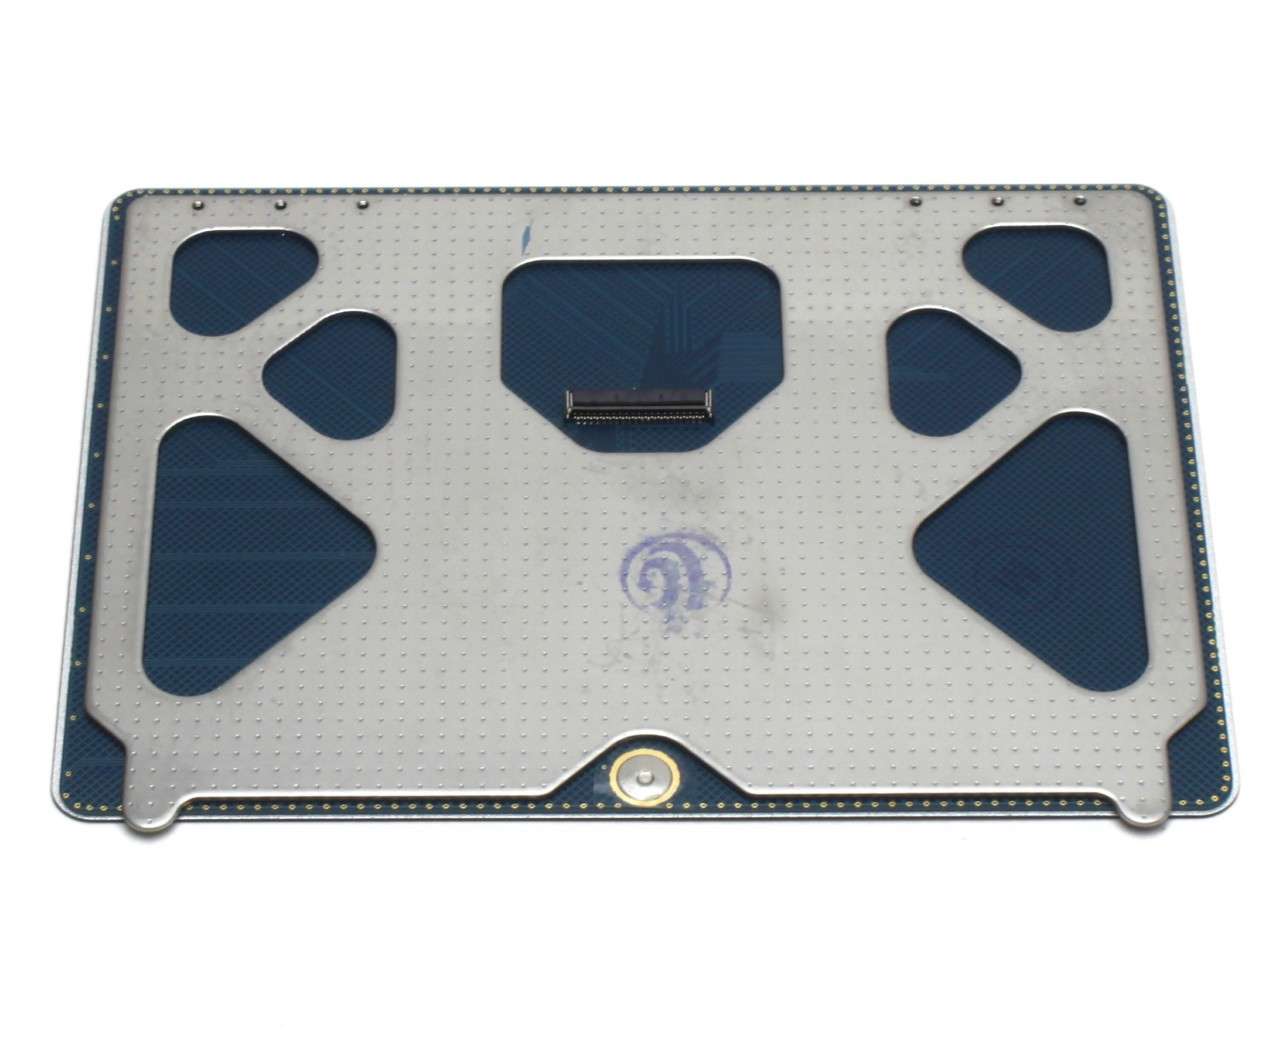 Touchpad Apple Macbook Air 13 A1466 Mid 2012 Trackpad 2012 2012